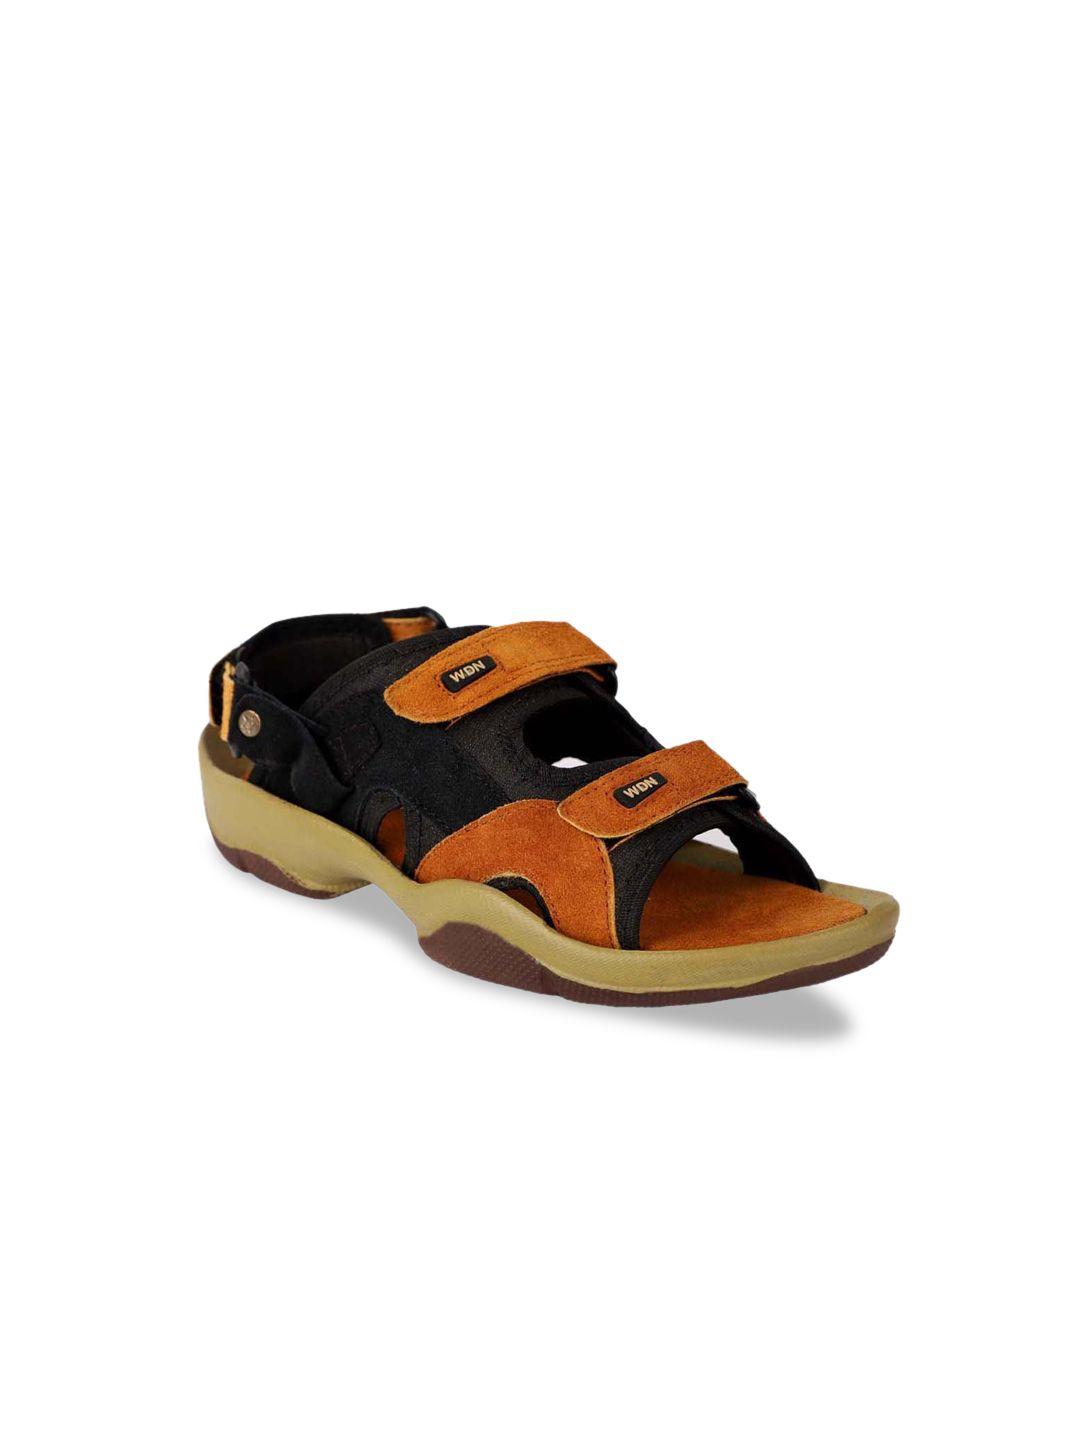 woakers-men-tan-brown-&-black-colourblocked-leather-sports-sandals